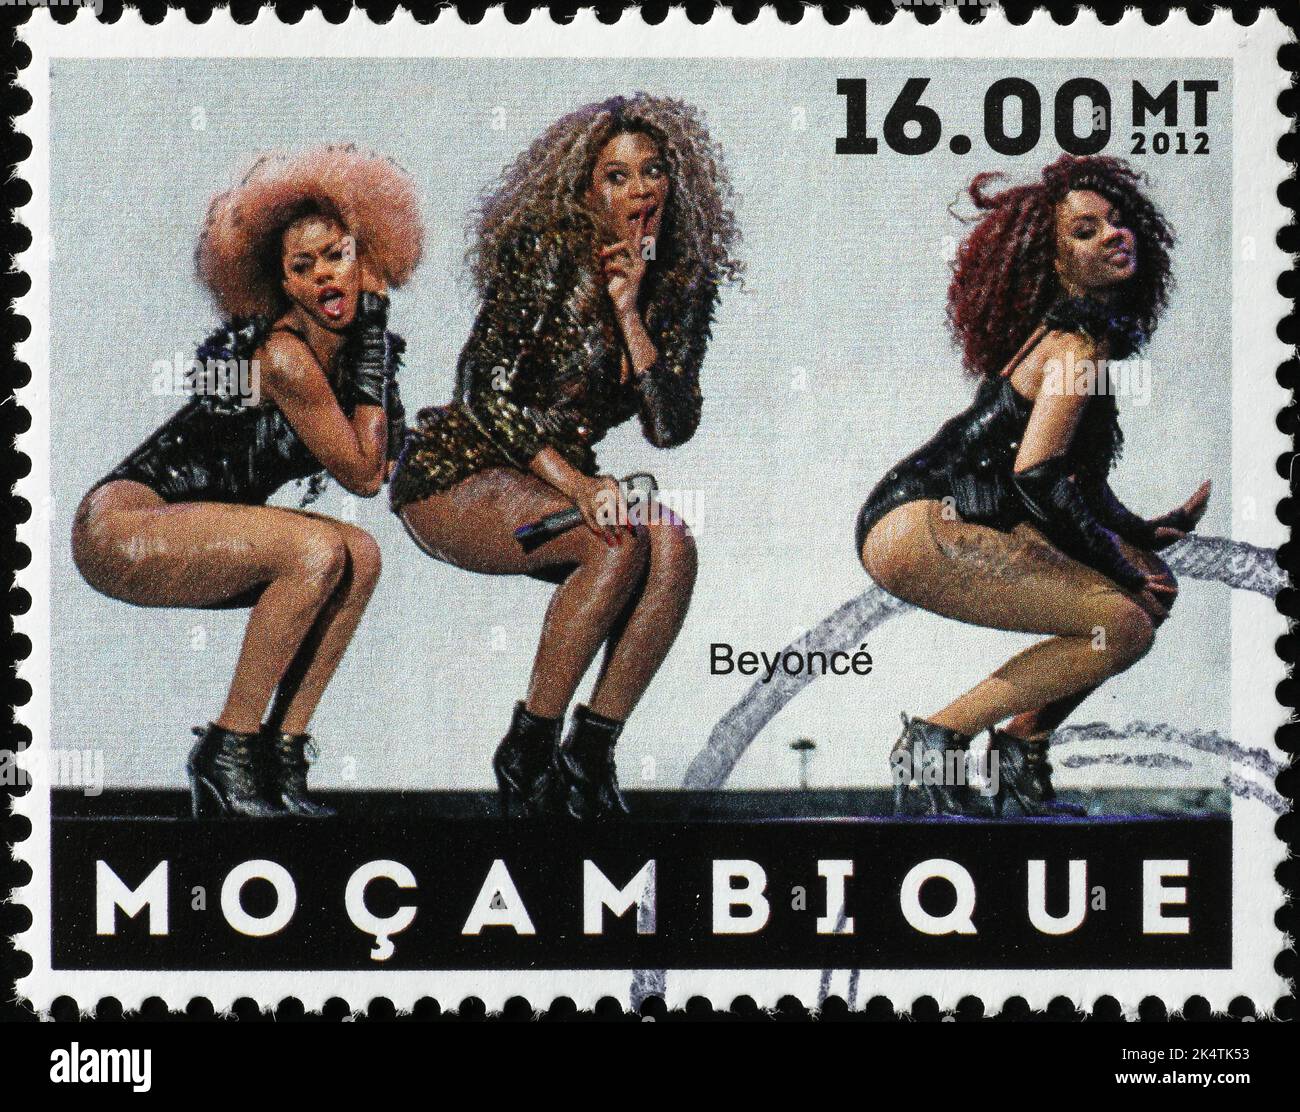 Beyoncé in concert on african postage stamp Stock Photo